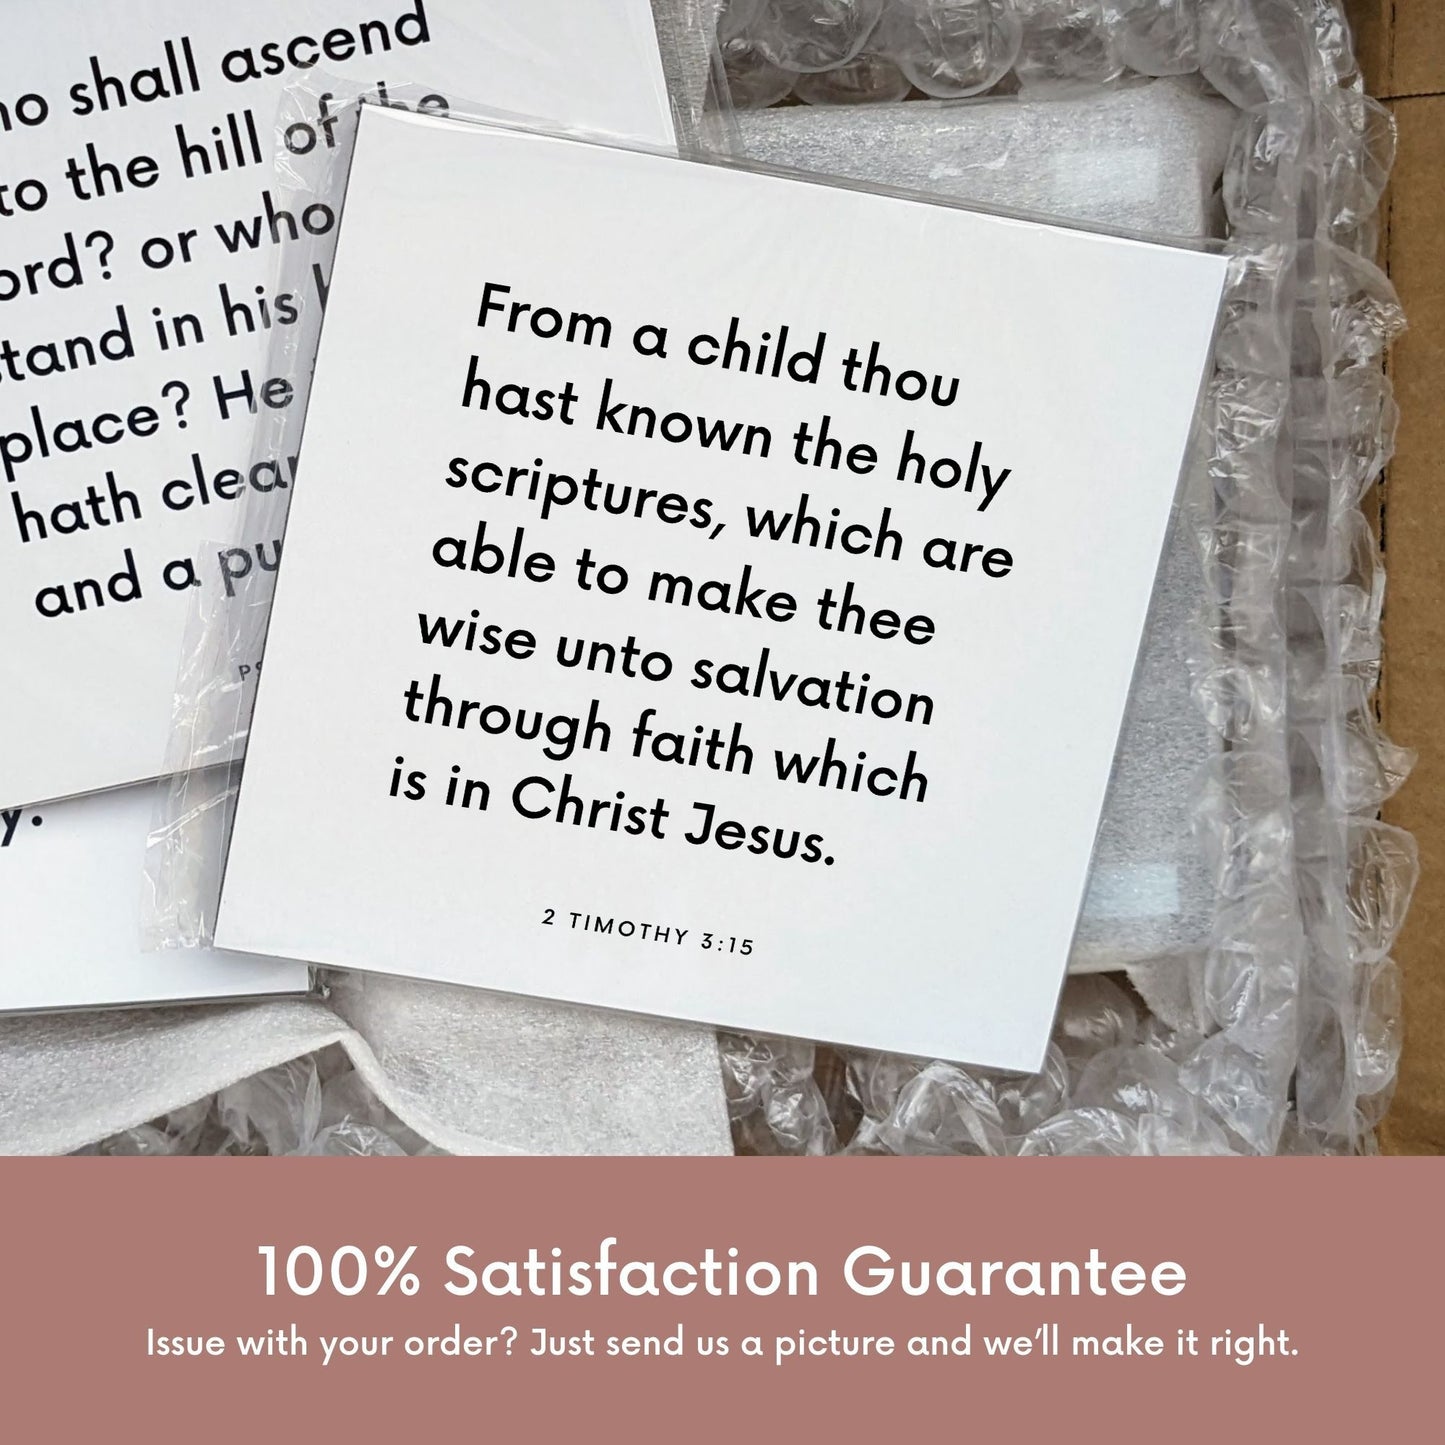 Shipping materials for scripture tile of 2 Timothy 3:15  - "From a child thou hast known the holy scriptures"